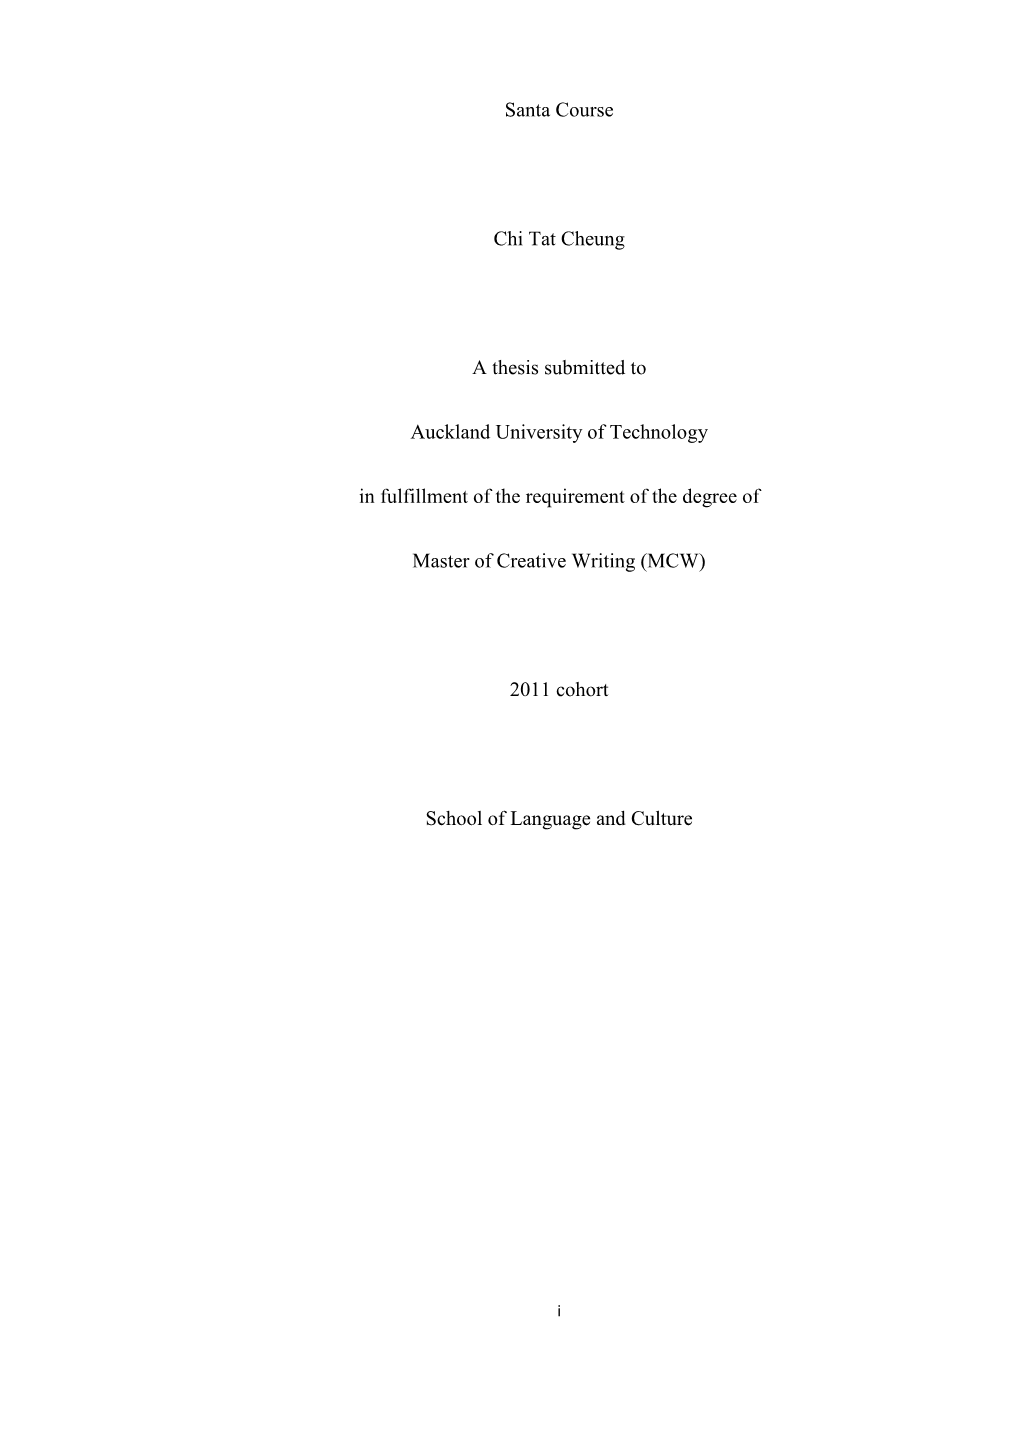 Santa Course Chi Tat Cheung a Thesis Submitted to Auckland University of Technology in Fulfillment of the Requirement of The